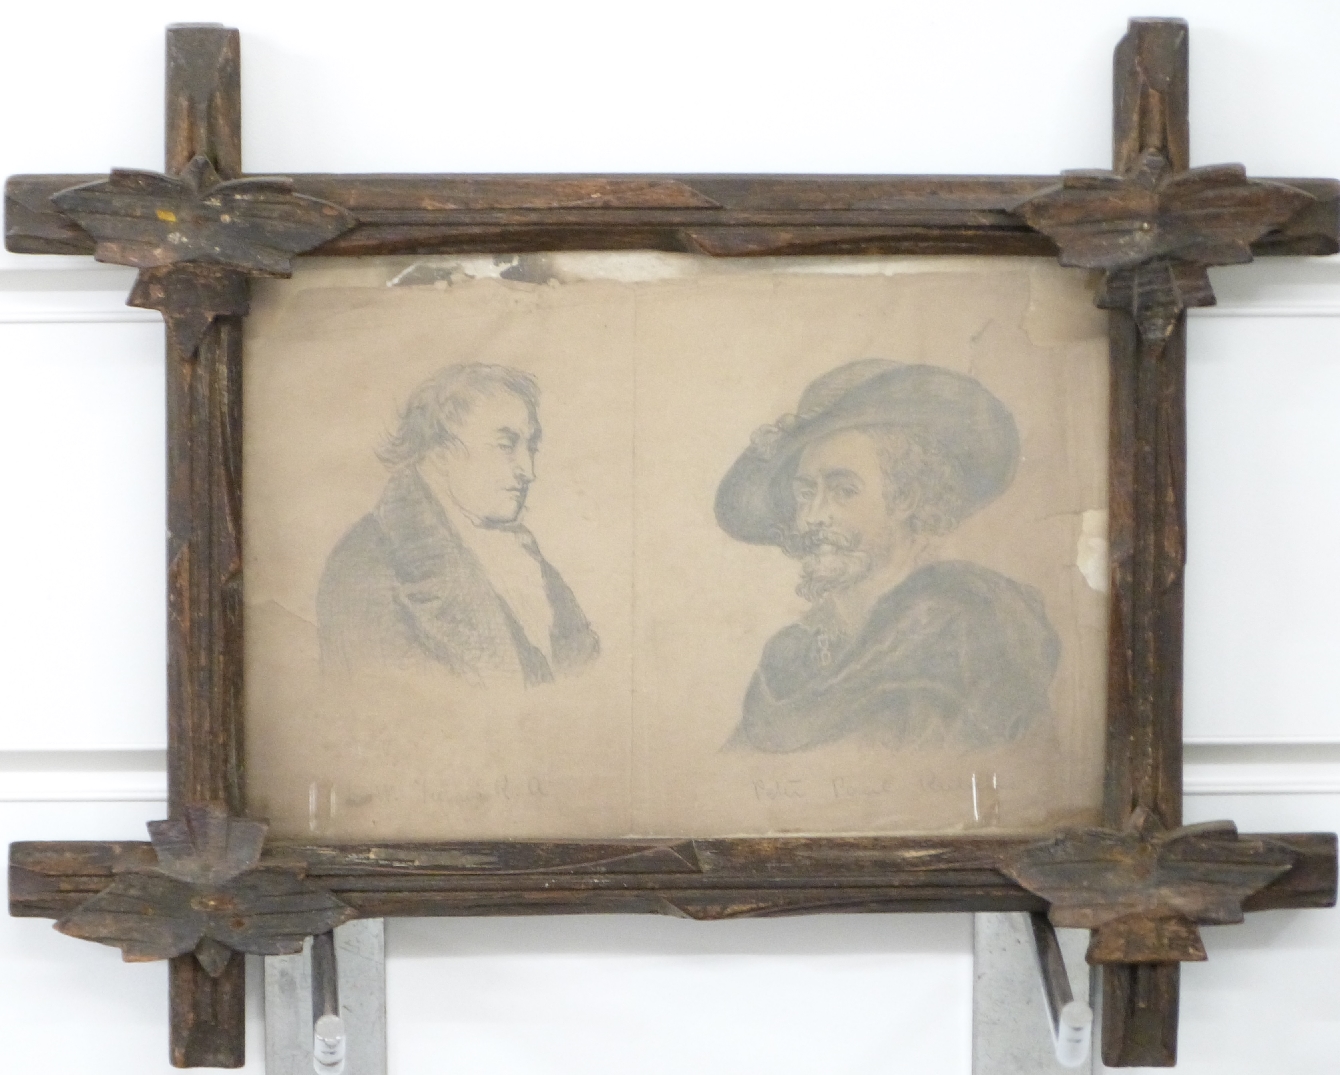 Pencil drawing of Turner and Rubens in carved wood frame - Image 2 of 3